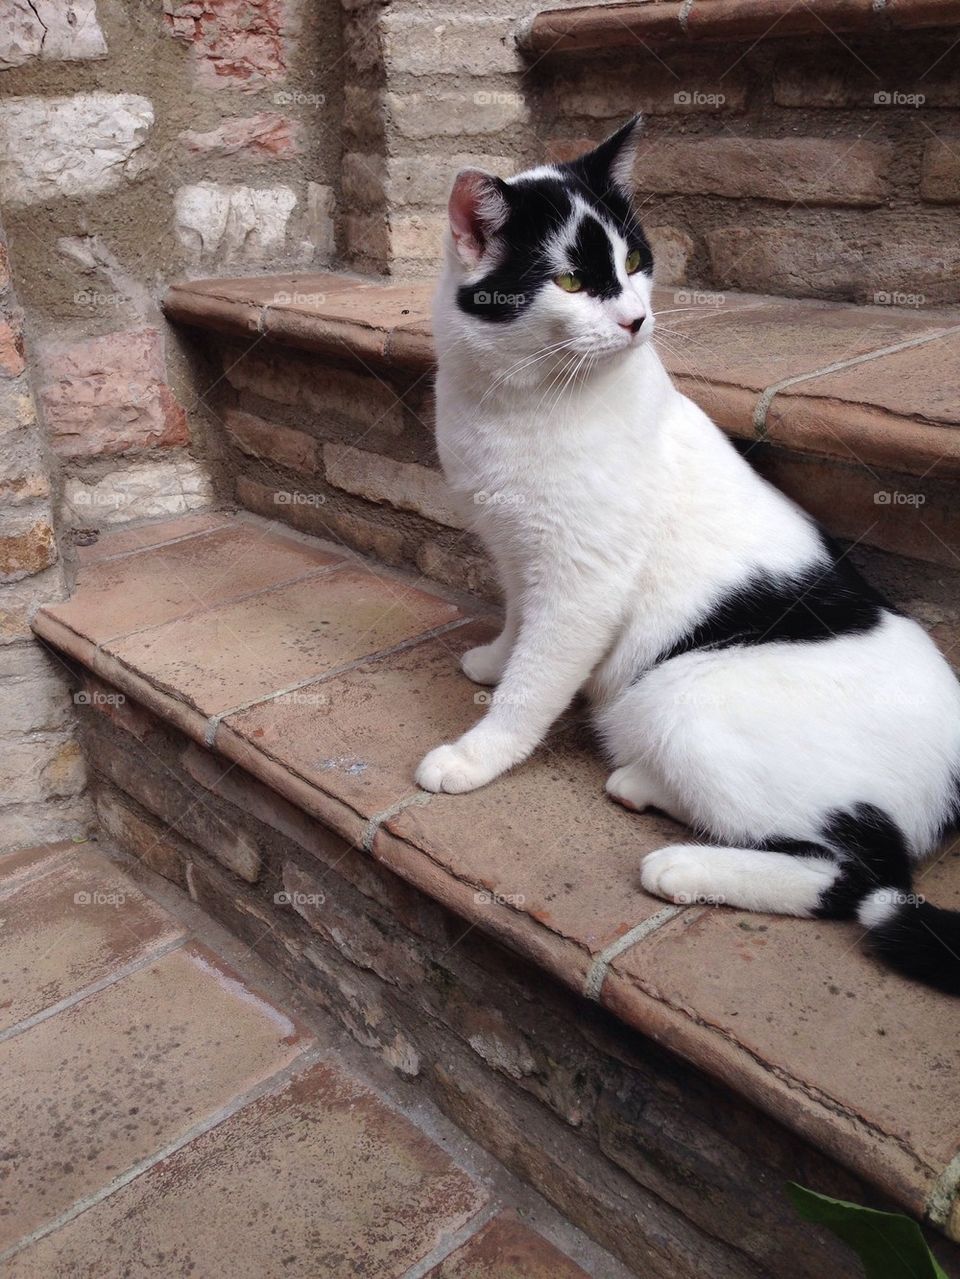 A cat from Assisi